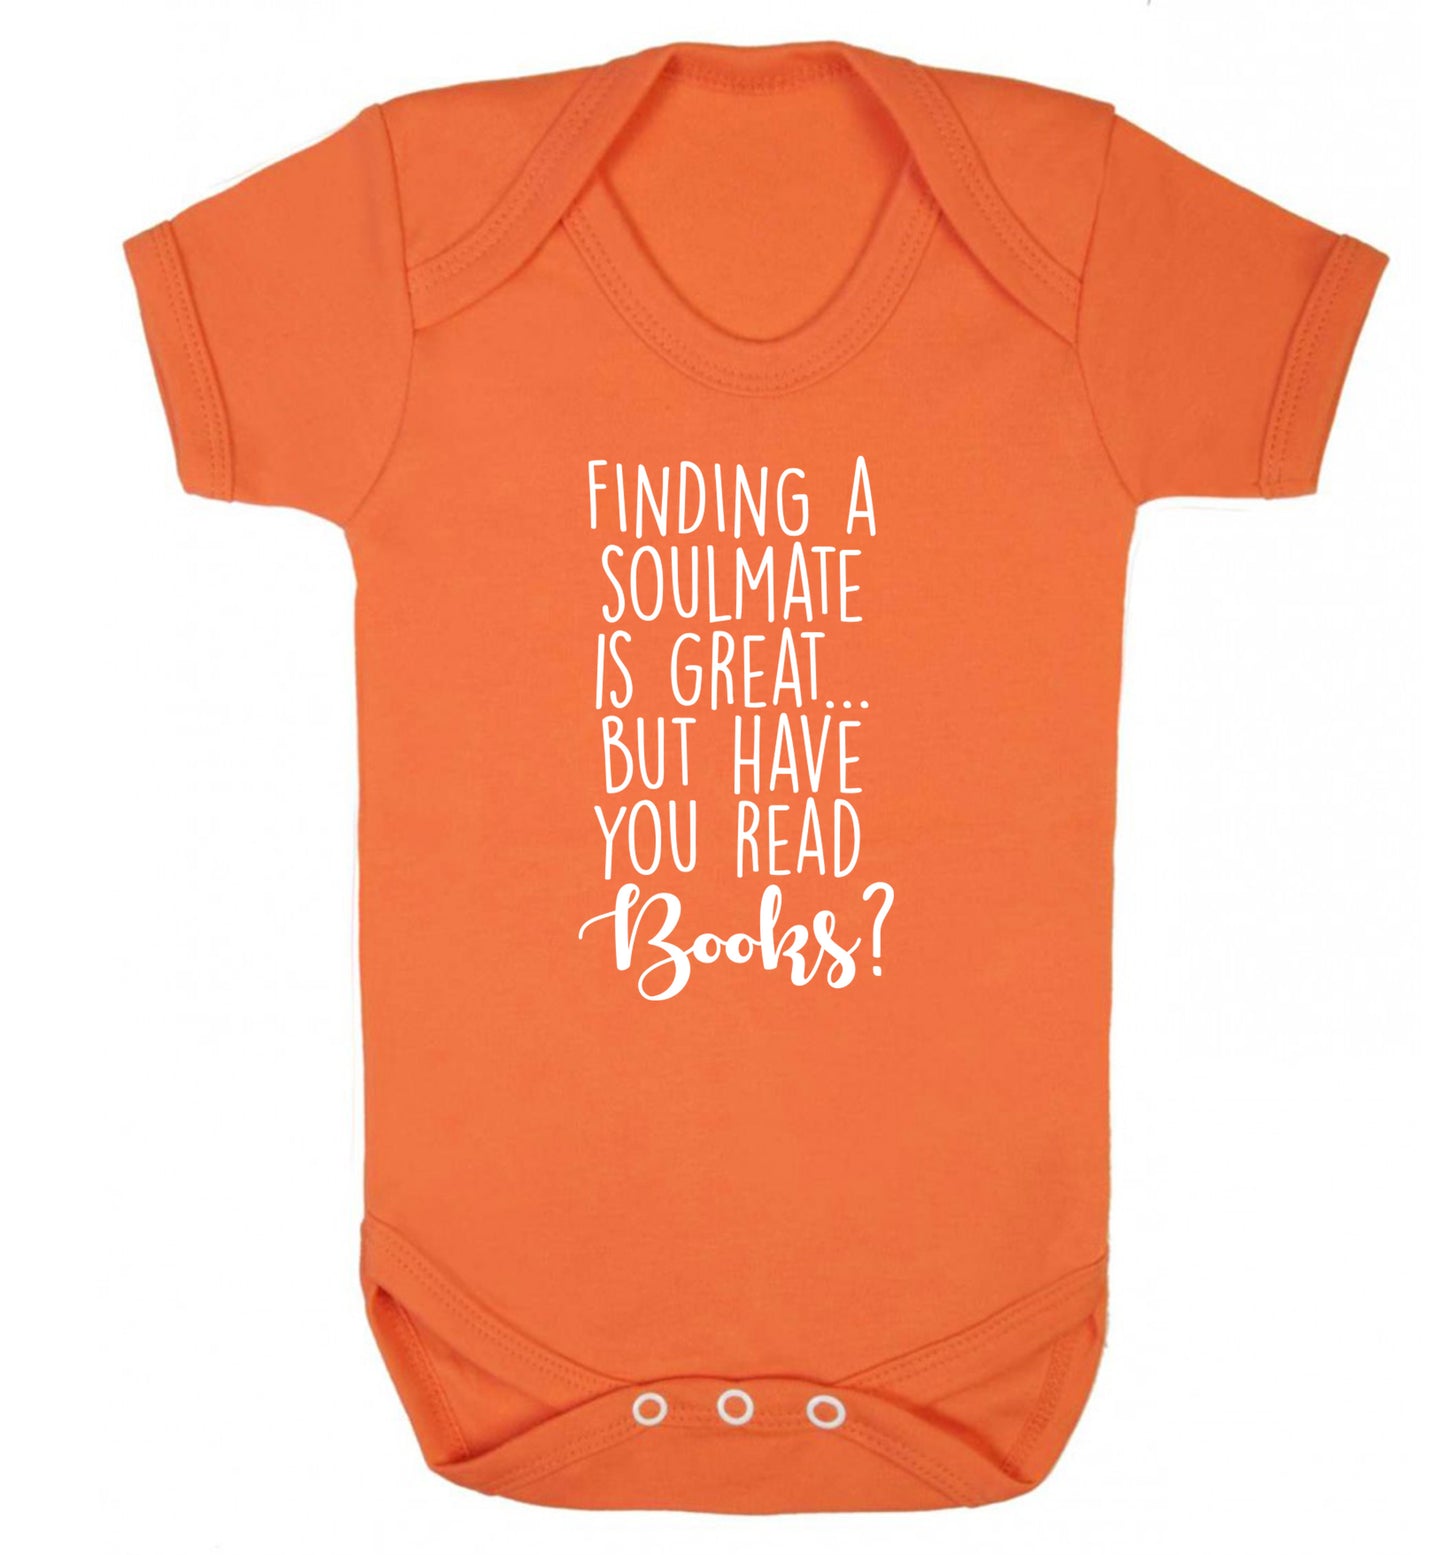 Finding a soulmate is great but have you read books? Baby Vest orange 18-24 months